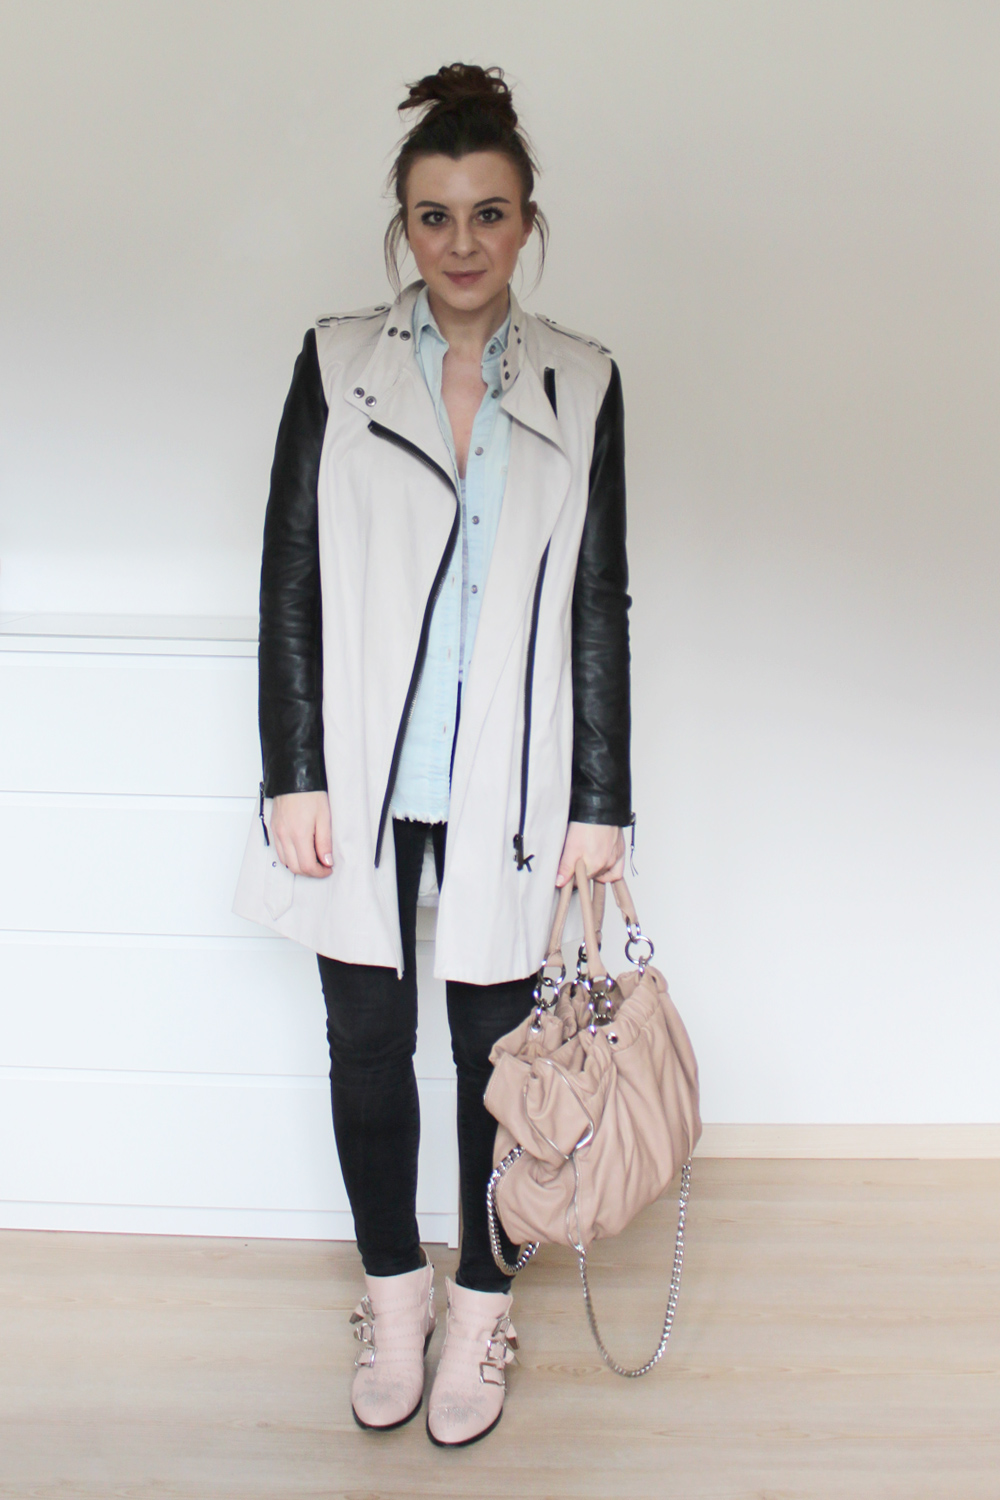 who is mocca, blogger, tirol, outfit, ootd, fashionblogger, weekly wardrobe review, alltagsoutfit, everyday look, inspiration, wie kombiniere ich, how to style, chanel jumbo, chloe susanna boots, balenciaga motorcycle bag, boyfriend jeans, pumps, kleiderkreisel, whoismocca.com